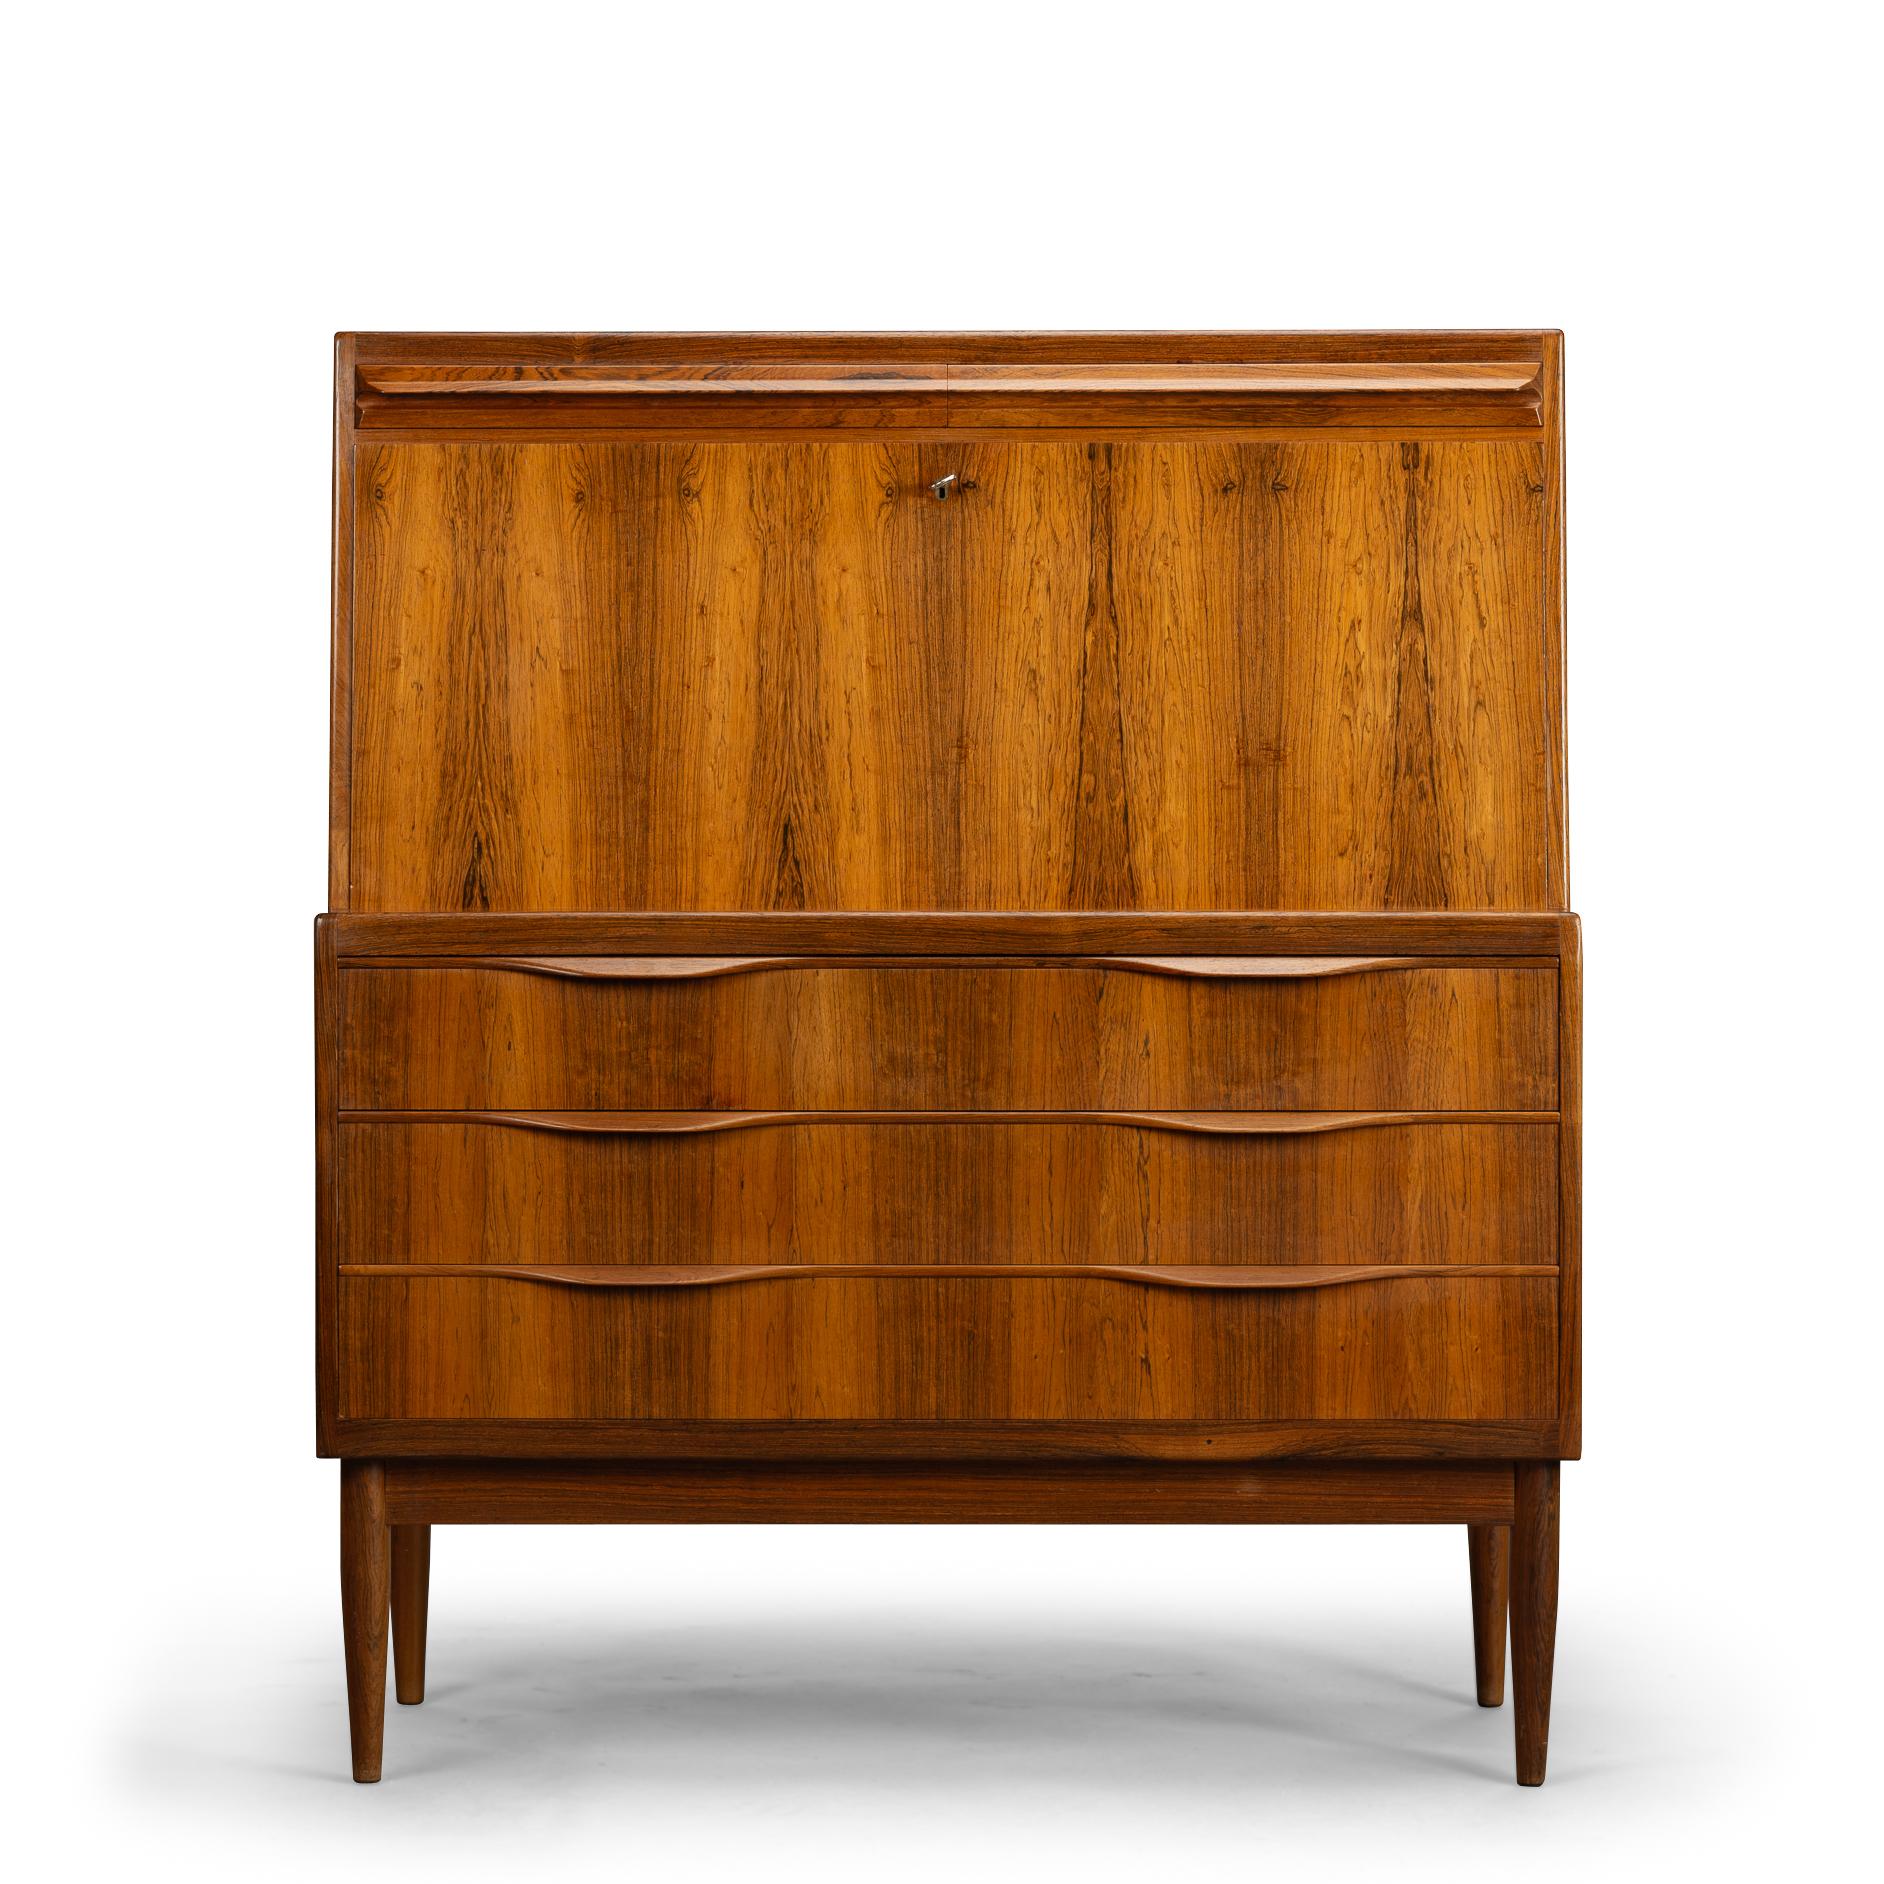 Danish Design
Danish rosewood secretary designed by Erling Torvits for Klim Møbelfabrik. This secretary has a hinged leaf that drops down and becomes a sturdy desktop. Behind this leaf are three drawers. Above this there are two compartments that